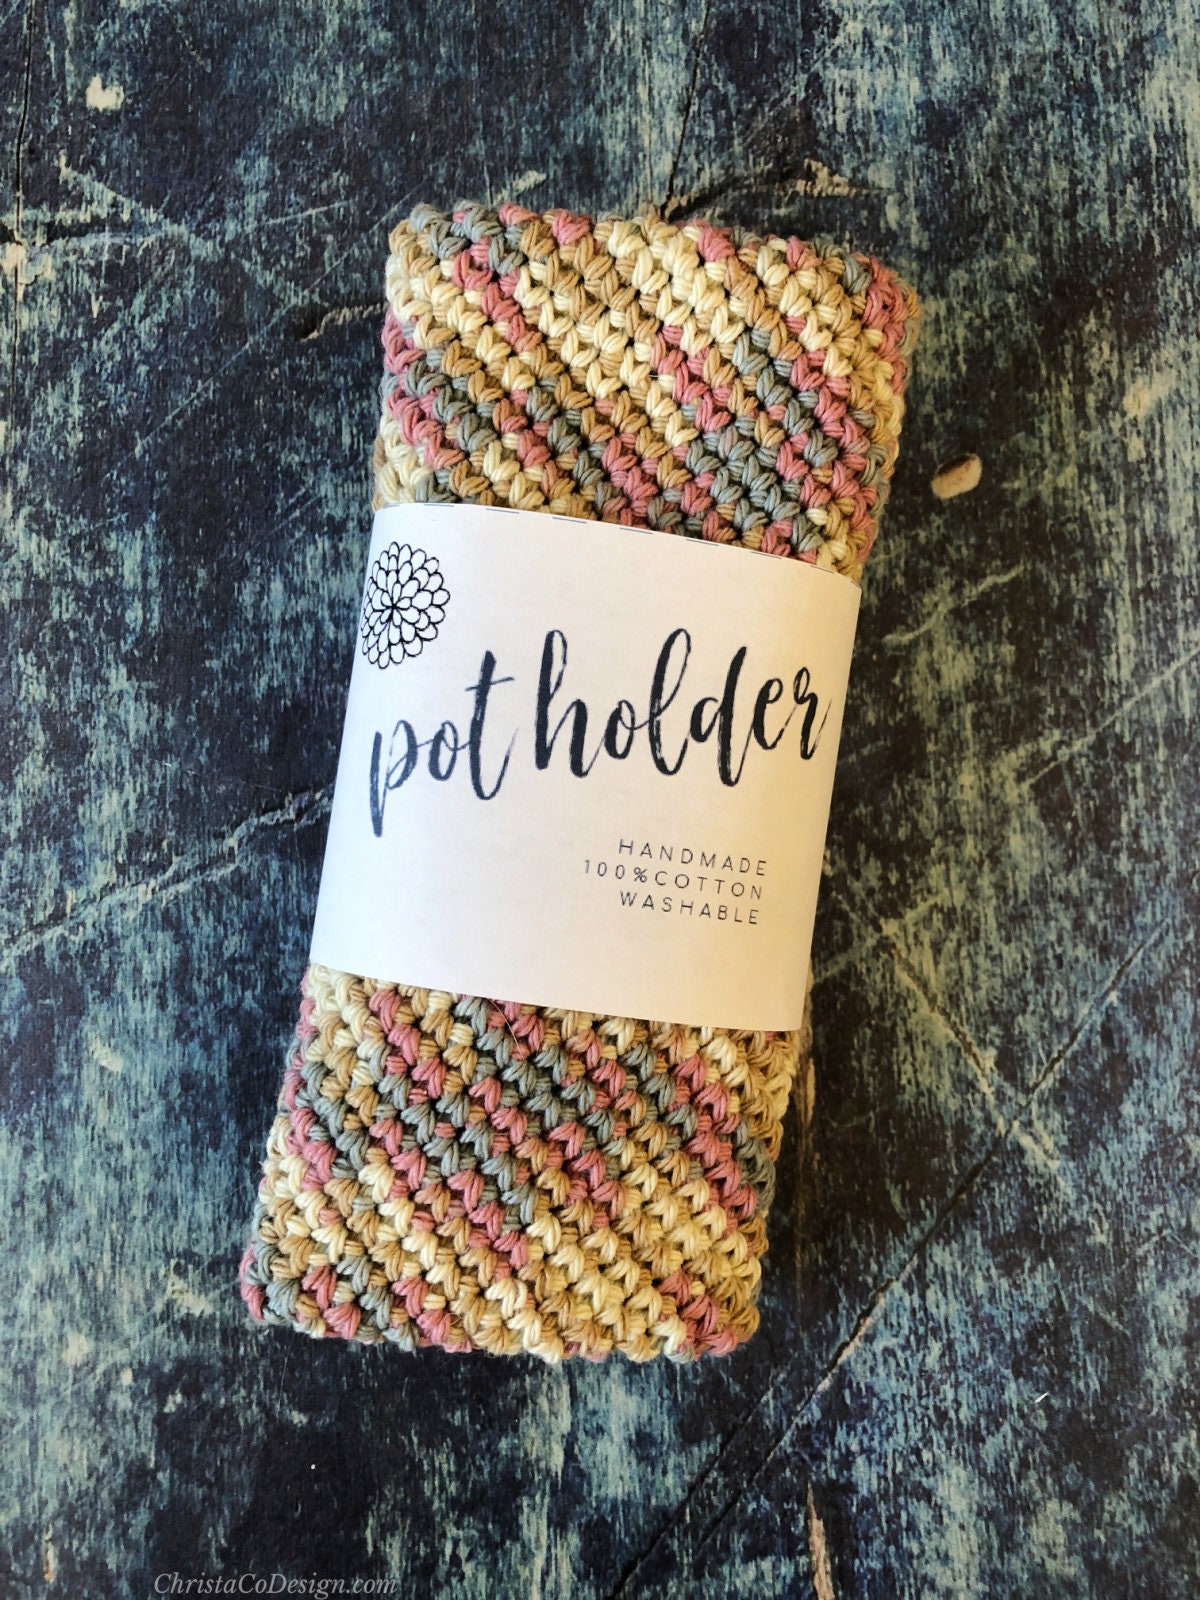 Tag Crochet Pot Holders - Teal – Ginger's of Corinth